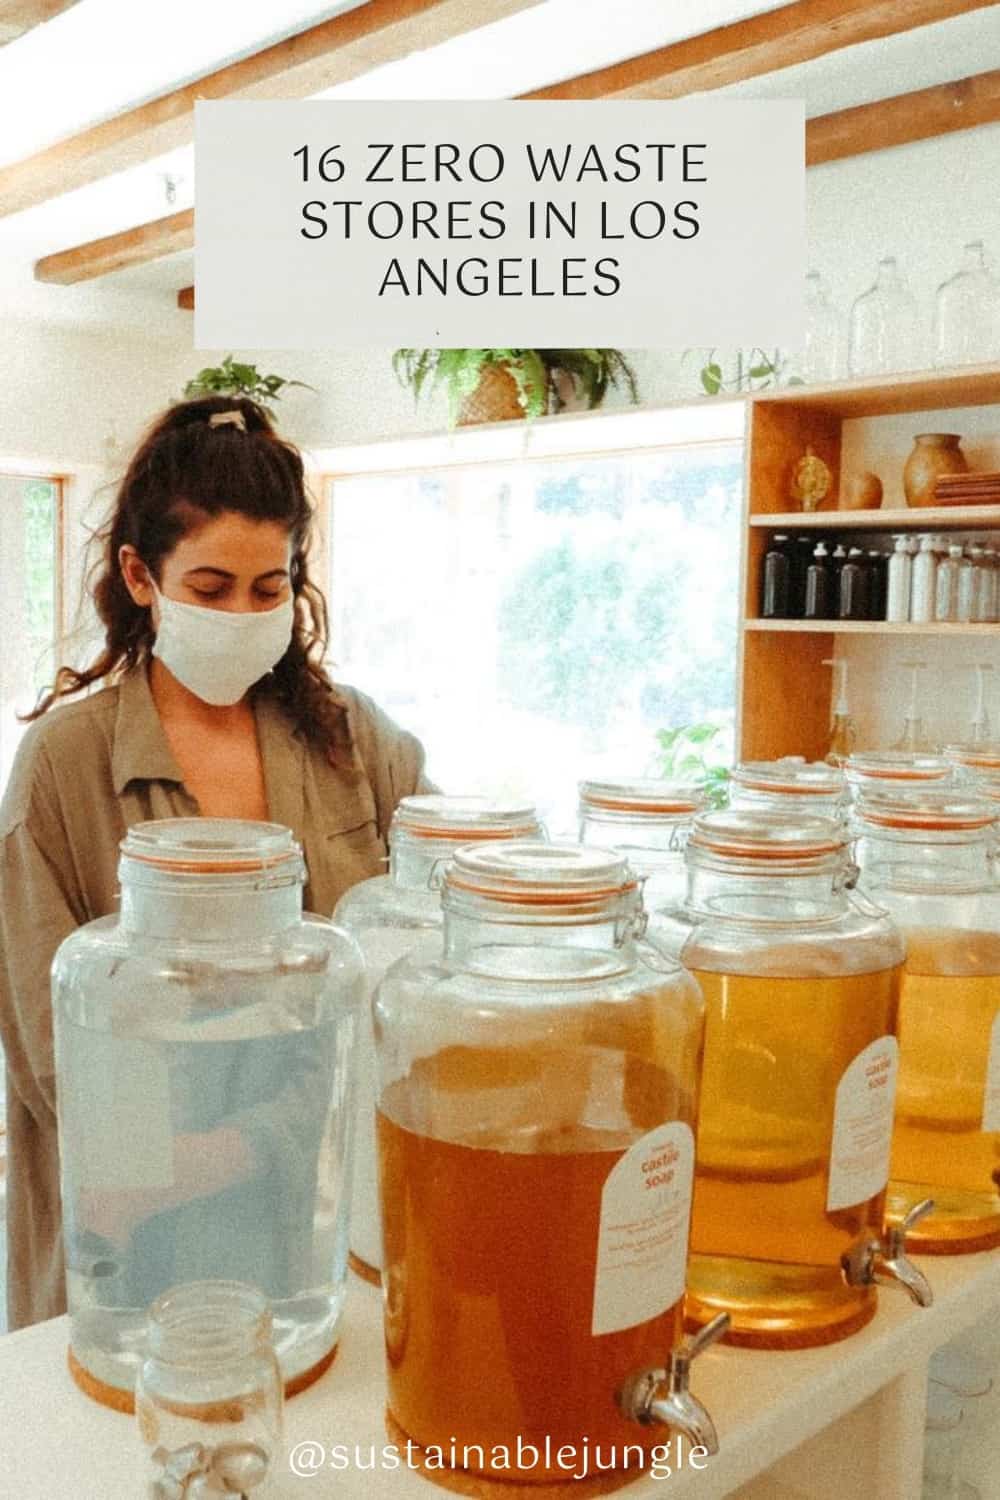 16 Zero Waste Stores In Los Angeles For All Your Bulk Refill Needs #zerowastestoresLosAngeles#zerowastestoresinLosAngeles #bestzerowastestoresLos Angeles #plasticfreetoresLos Angeles #bulktoresLos Angeles #sustainablejungle Image by The Well Refill